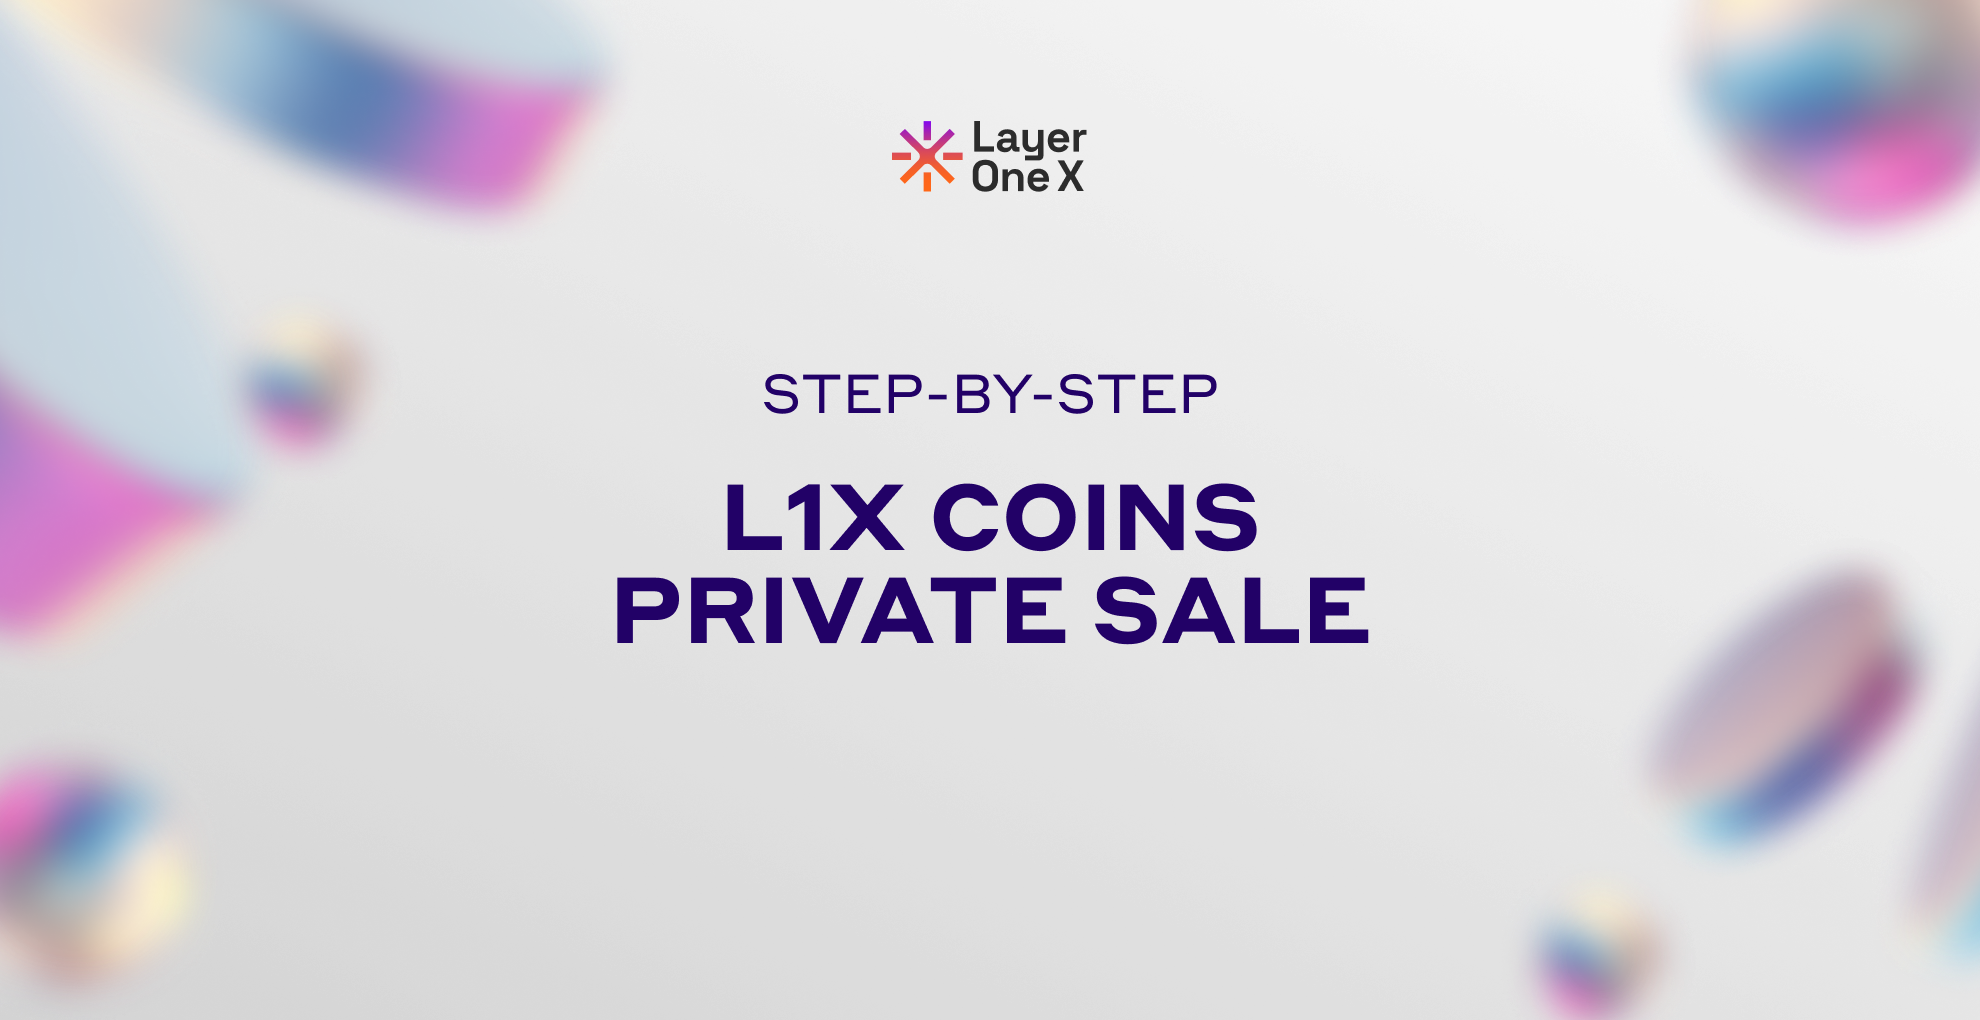 A step-by-step guide to claim your L1X Coins (Private Sale)